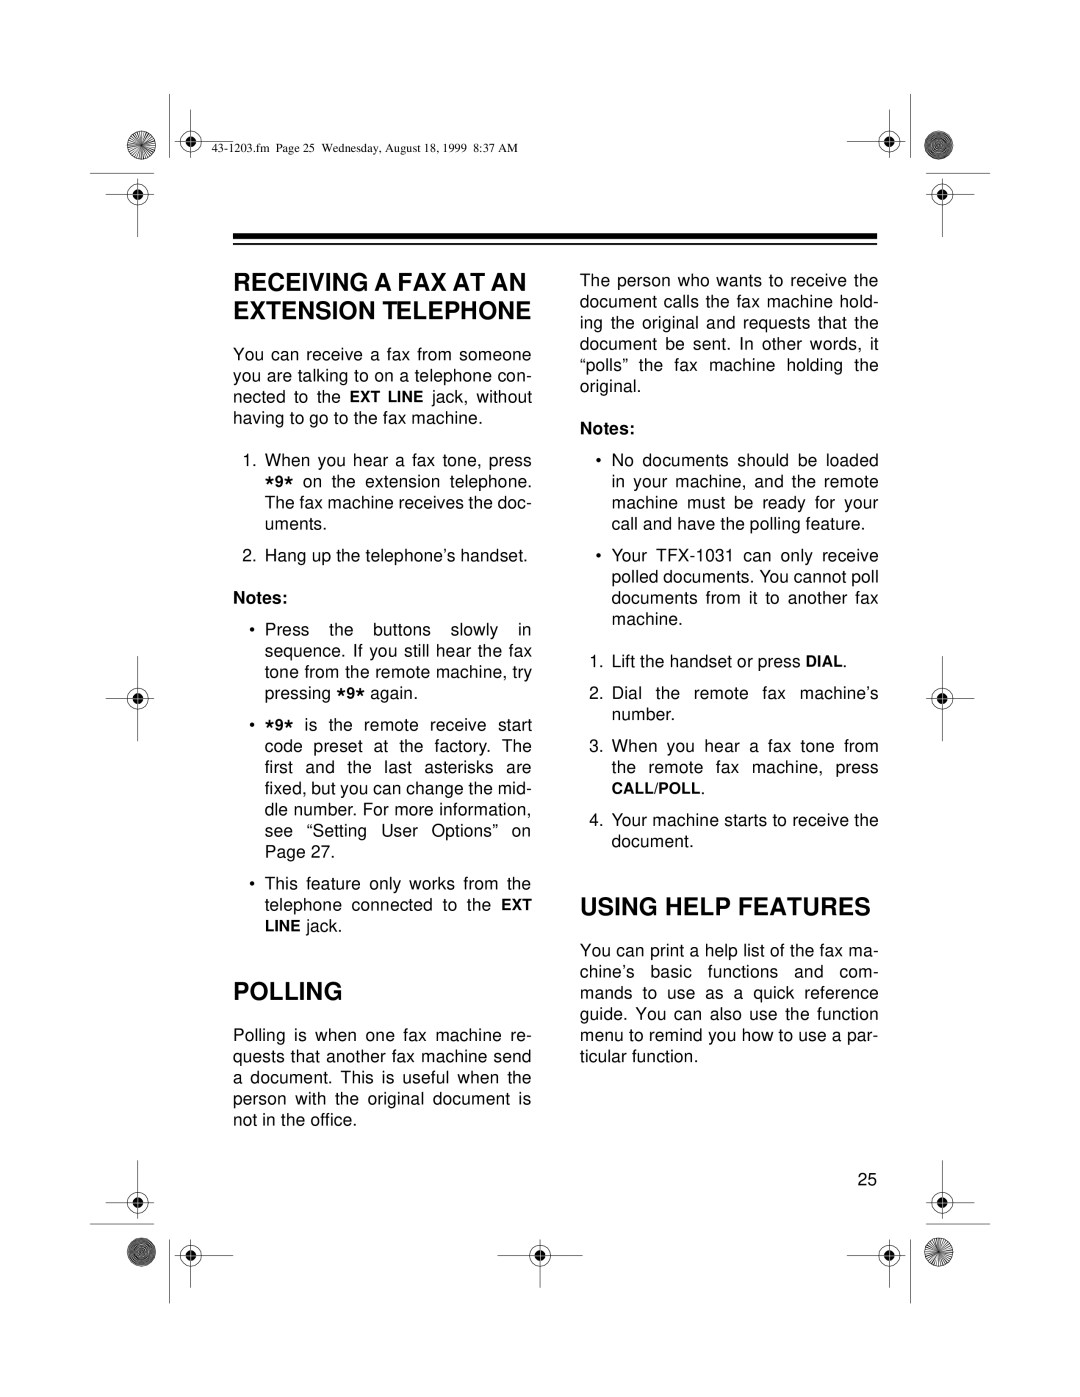 Radio Shack TFX-1031 owner manual Polling, Using Help Features, Receiving A Fax At An Extension Telephone 